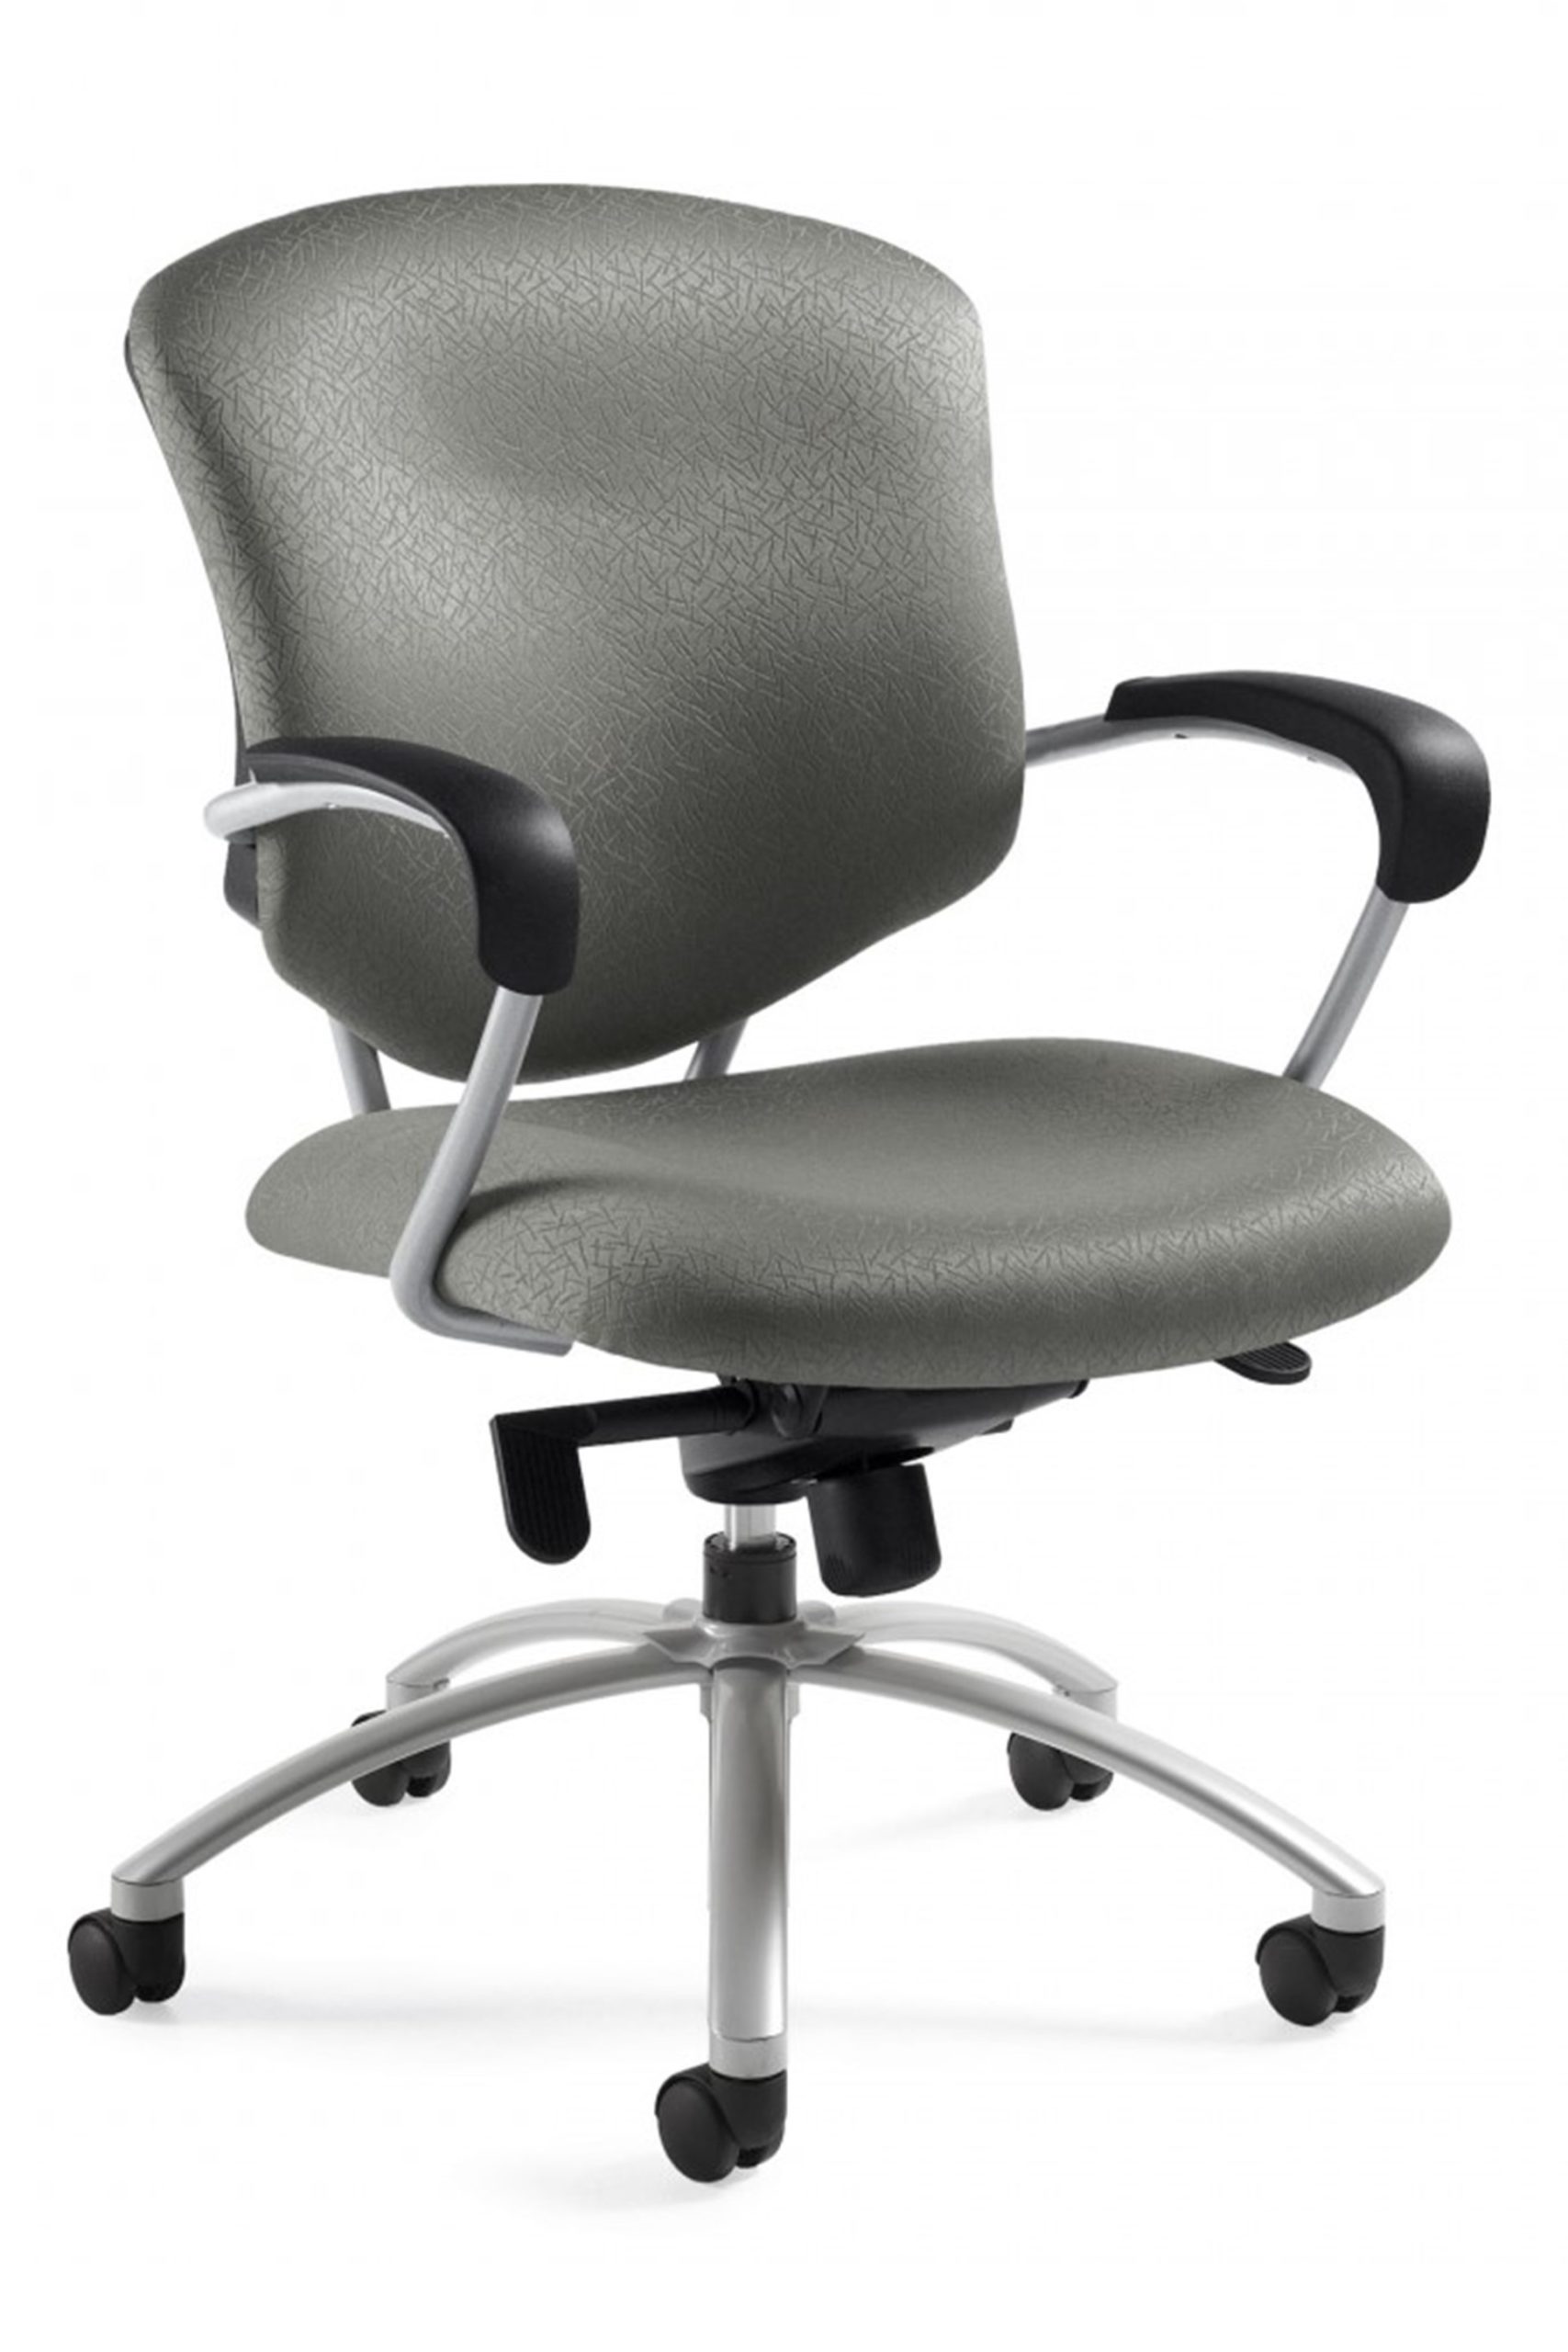 Swivel tilt conference chair with knee tilt mechanism, taupe fabric seat and back, tilt tension control, tungsten 5-star base, tungsten loop arms with black soft-skinned urethane arm caps.